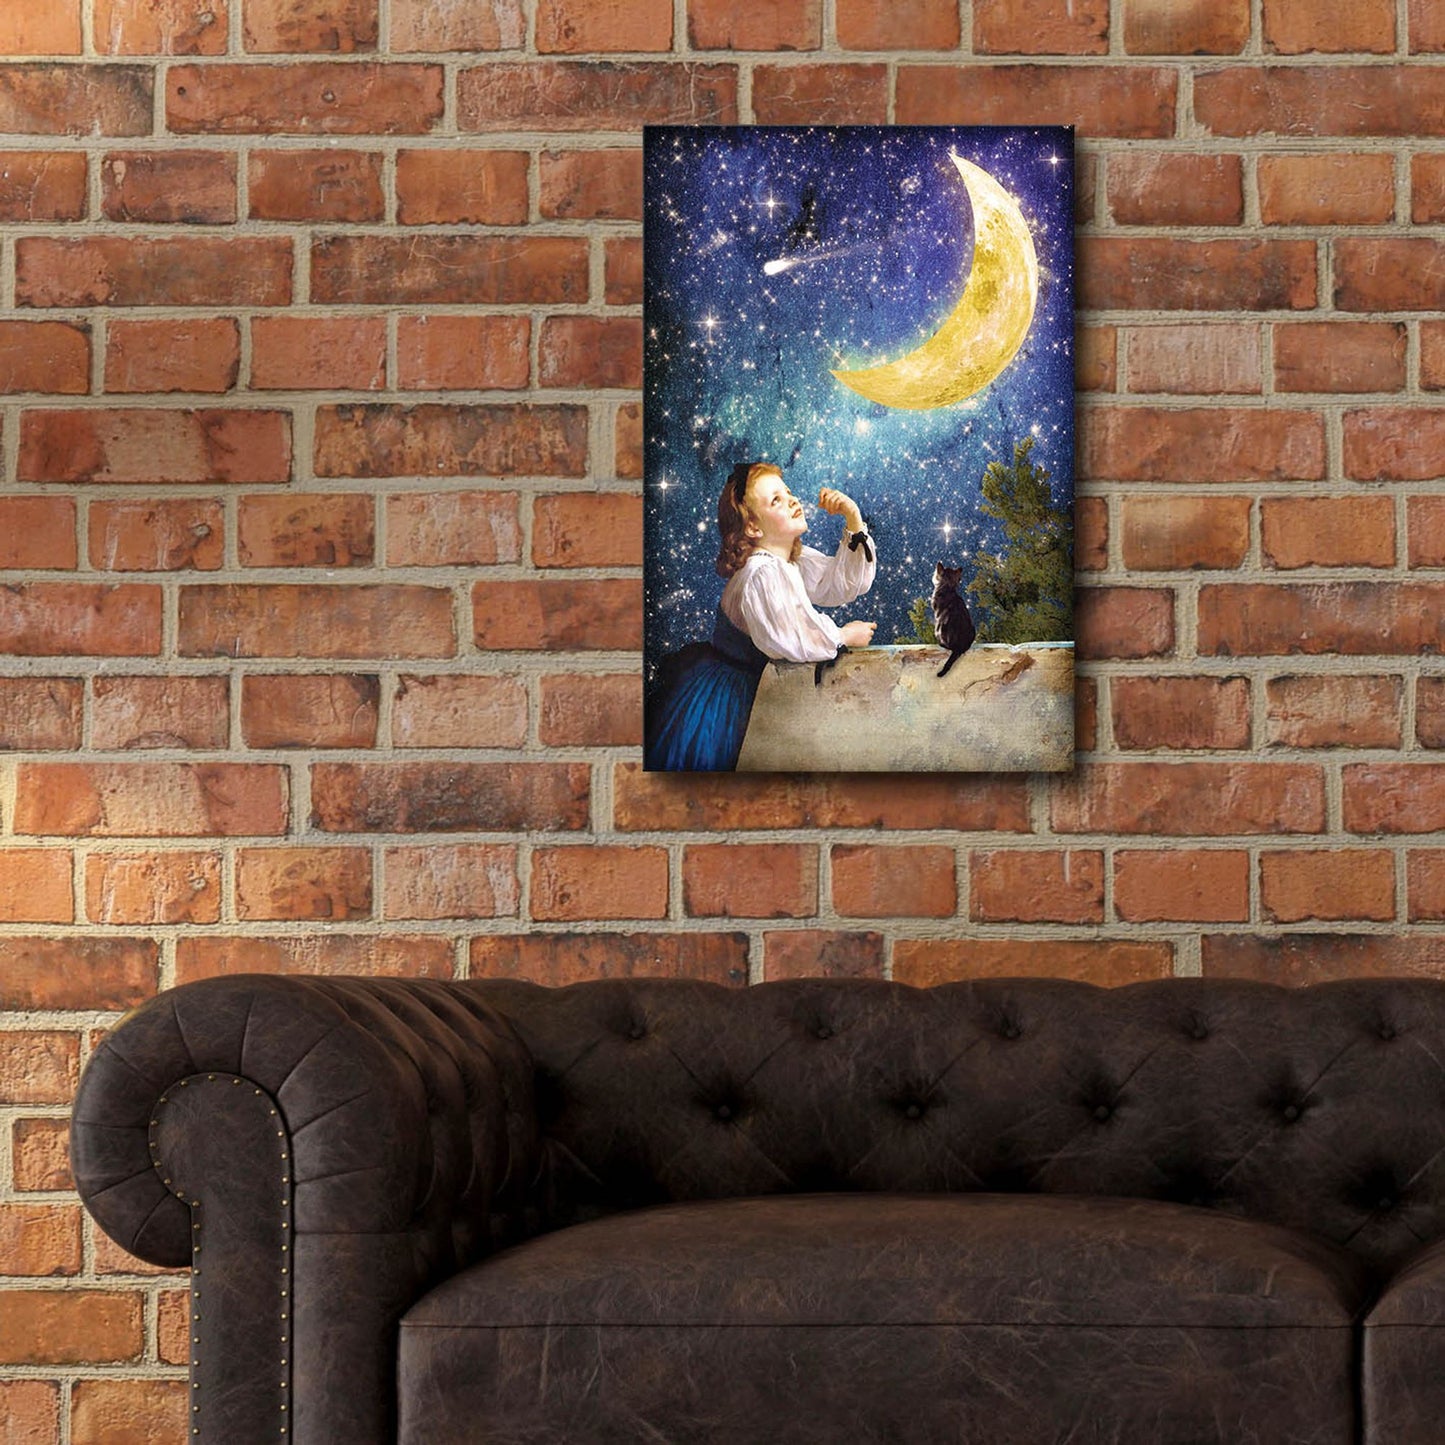 Epic Art 'One Wish Upon the Moon' by Diogo Verissimo, Acrylic Glass Wall Art,16x24